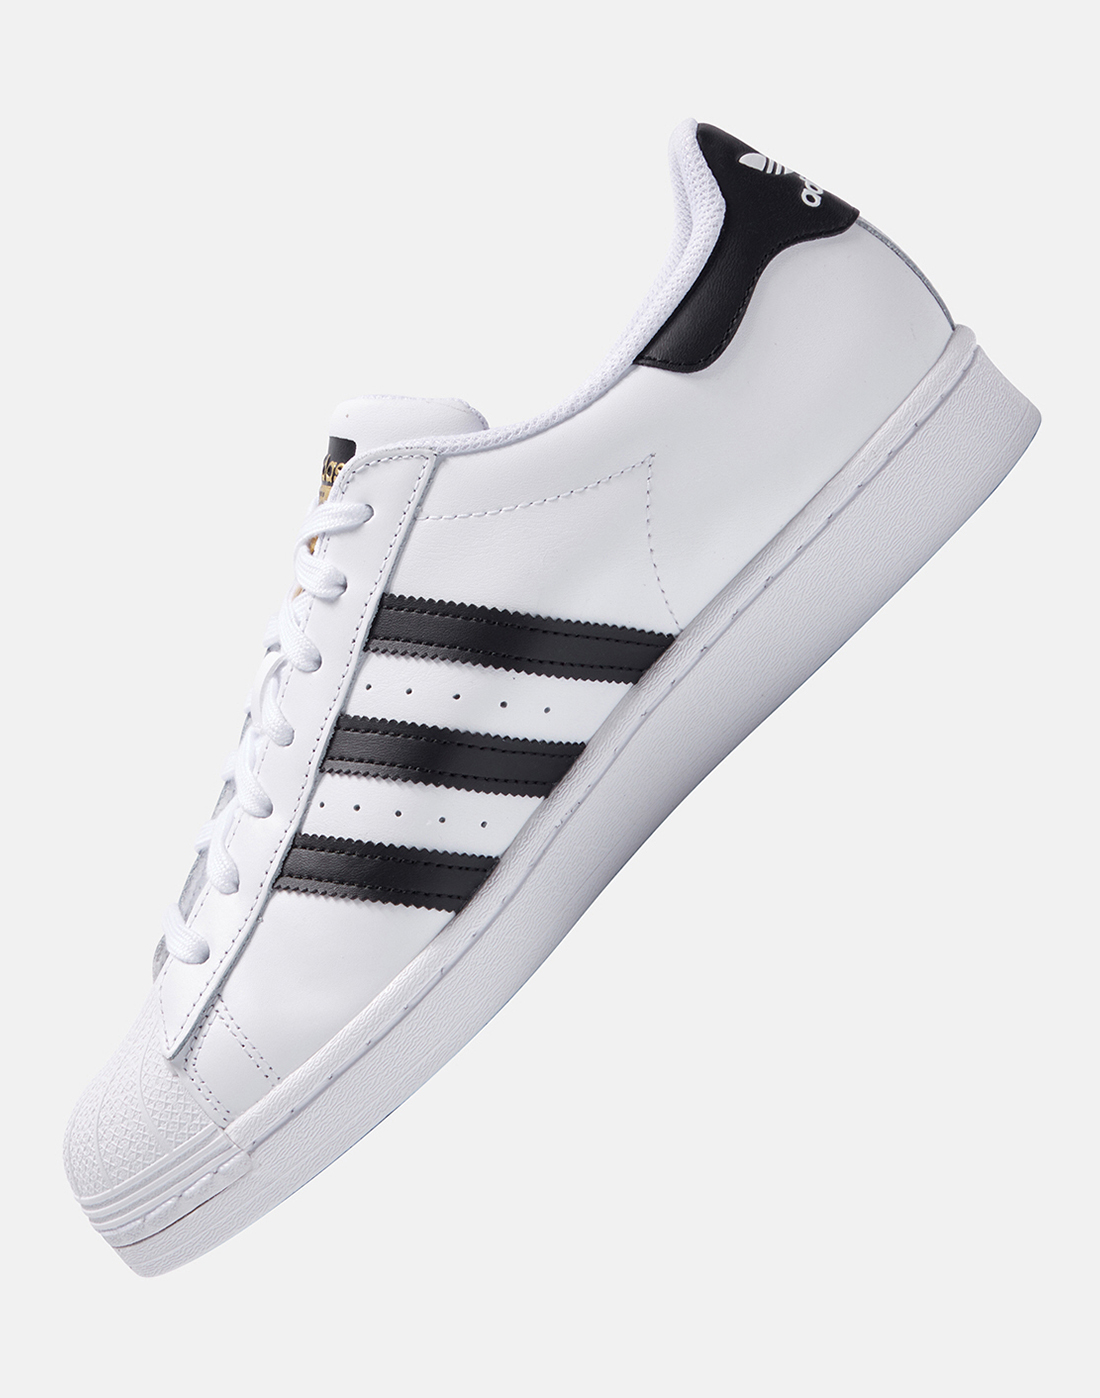 adidas Originals Adults Superstar - White | Life Style Sports IE